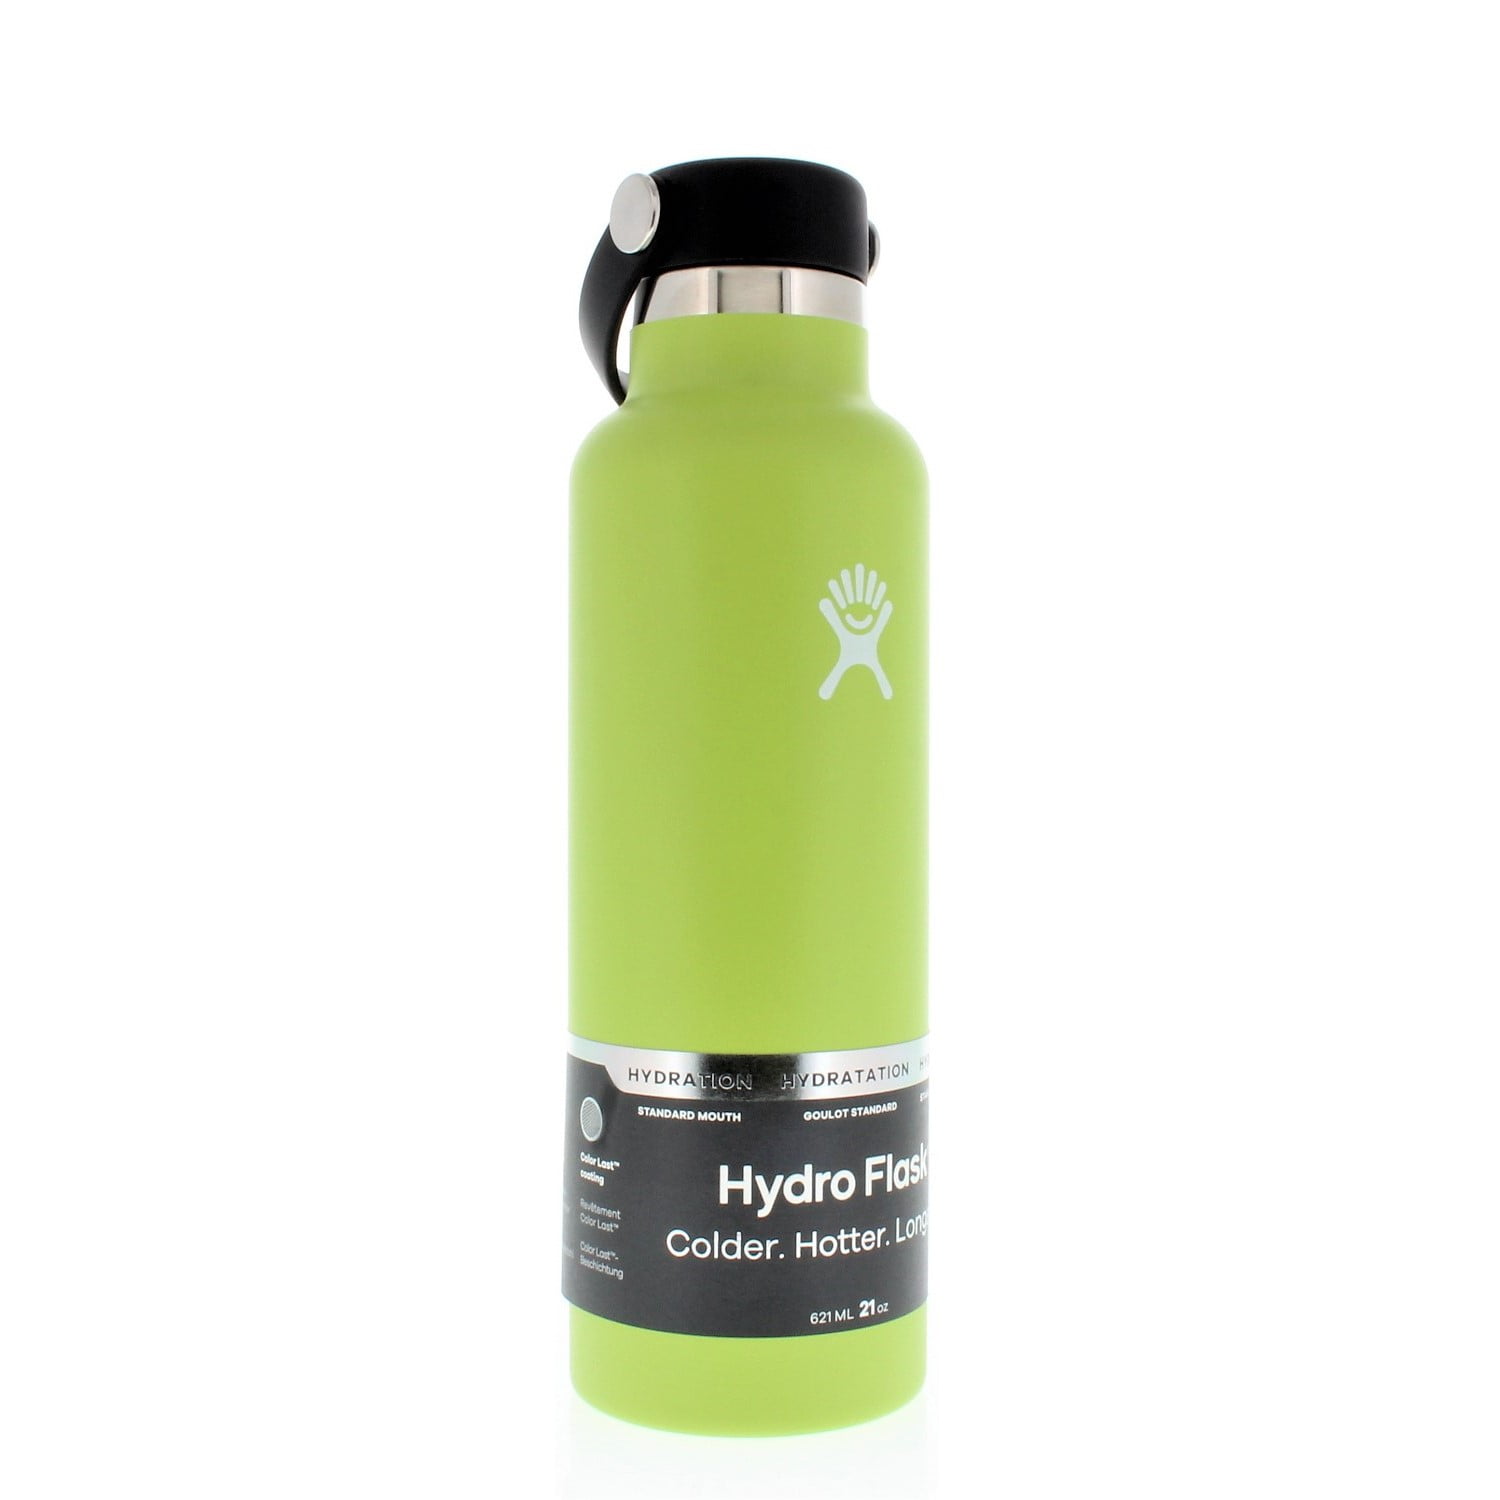 Hydro Flask 40oz Wide Mouth w/Flex Cap (lot of 2) - Seagrass - NEW